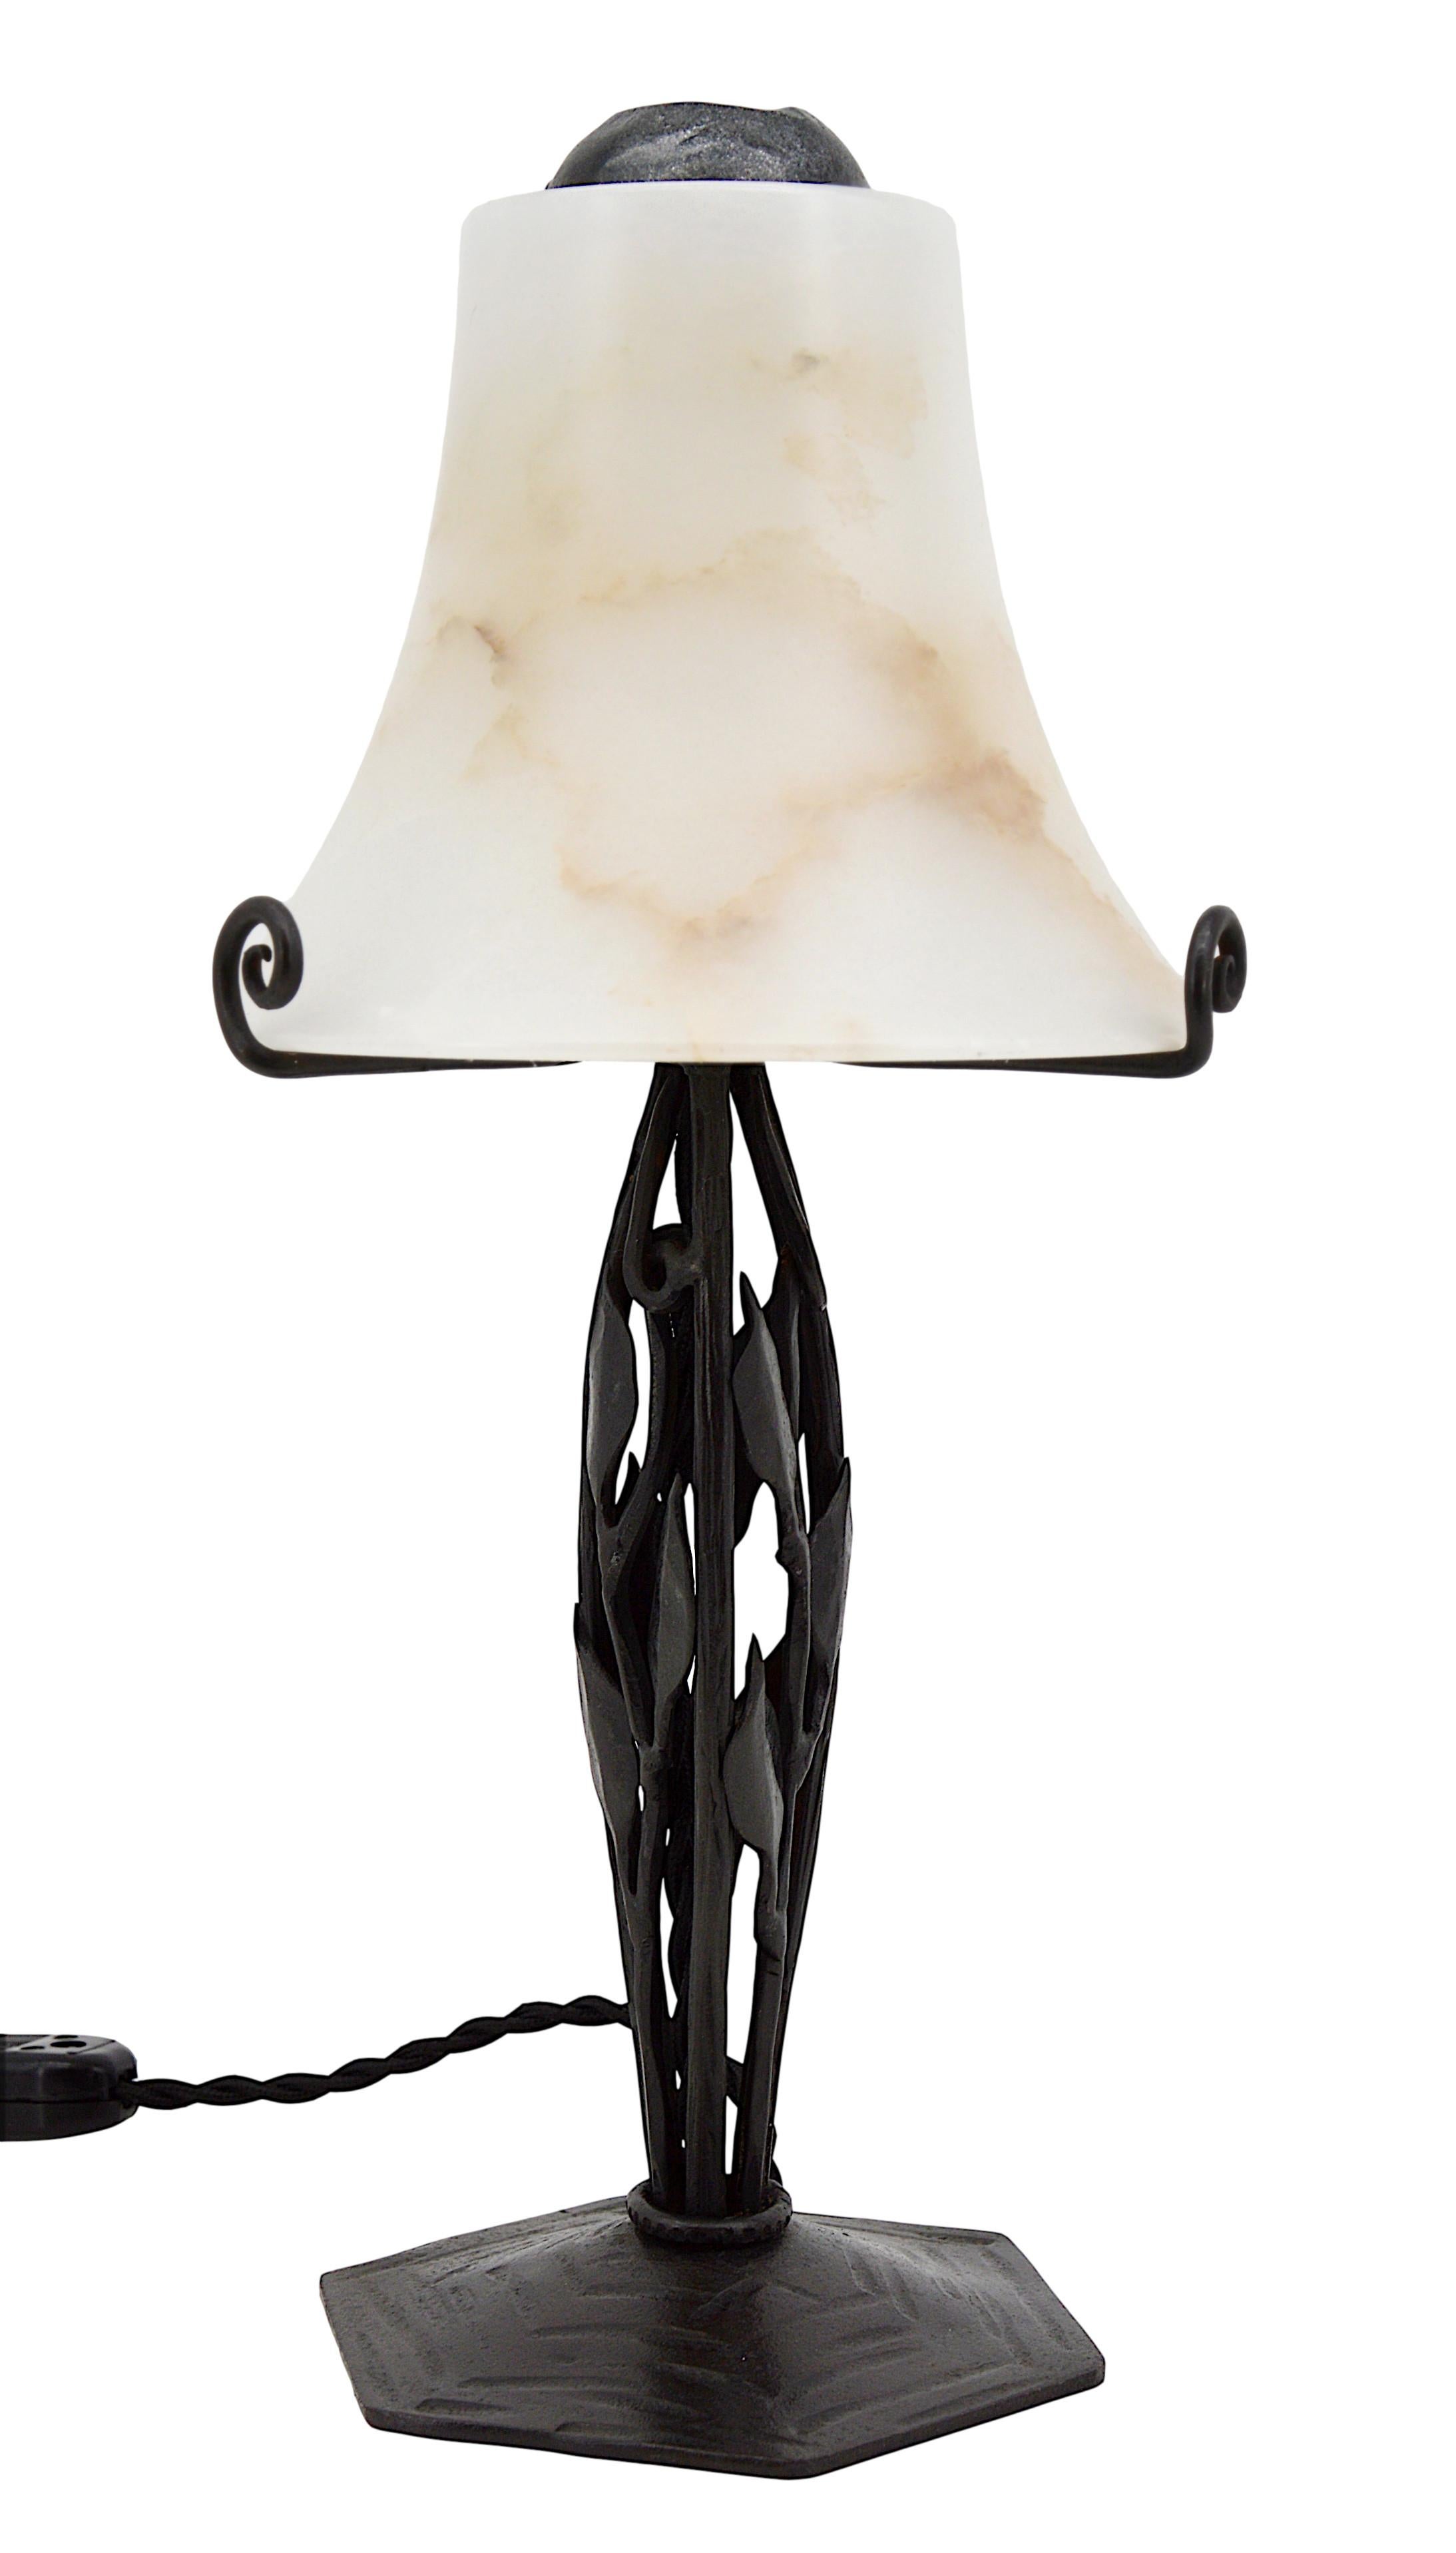 Early 20th Century French Art Deco Alabaster and Wrought-Iron Table Lamp, 1925 For Sale